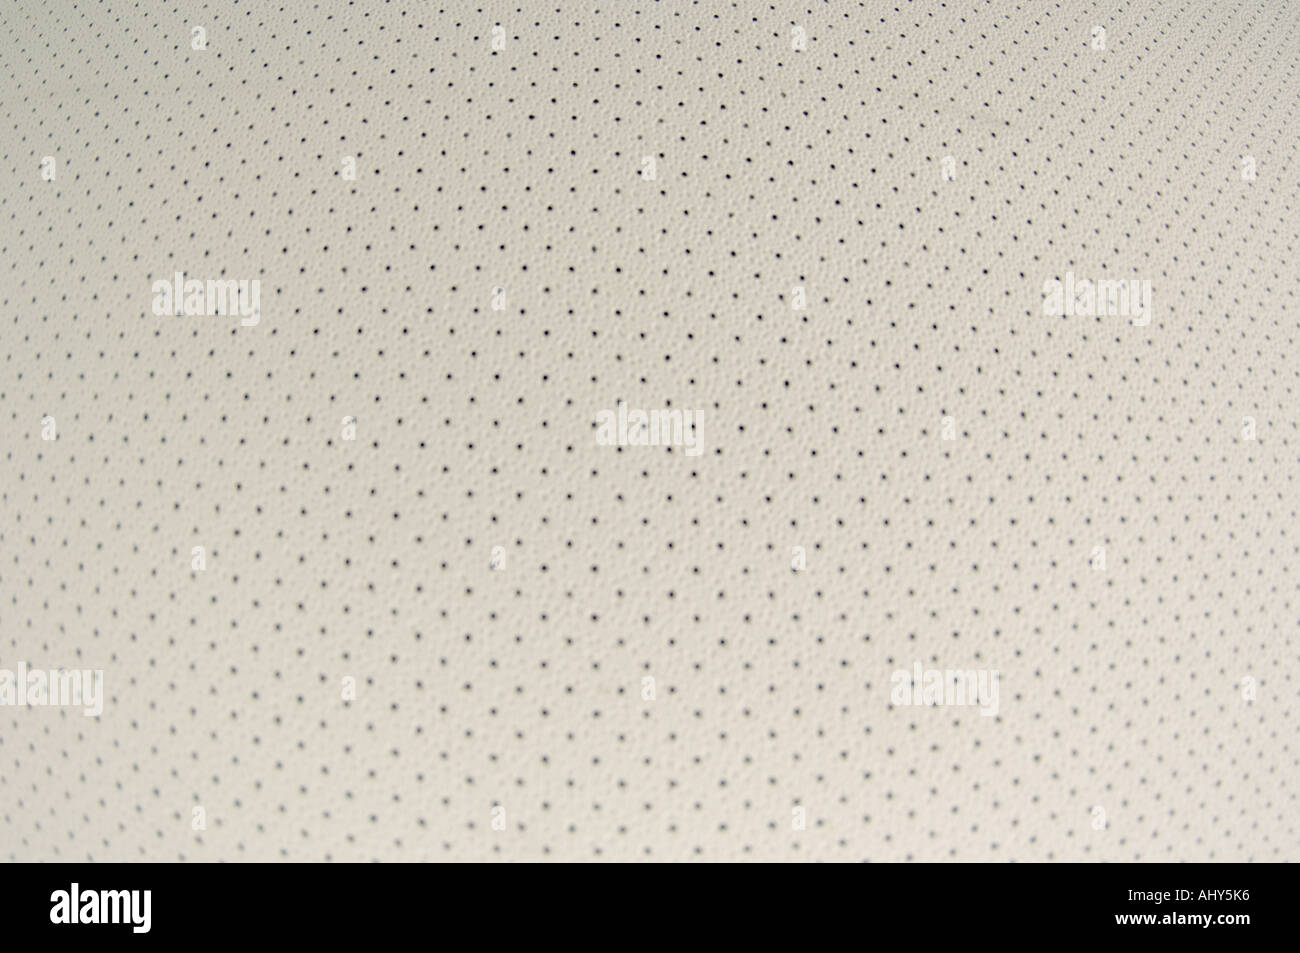 pattern dots in cloth Stock Photo